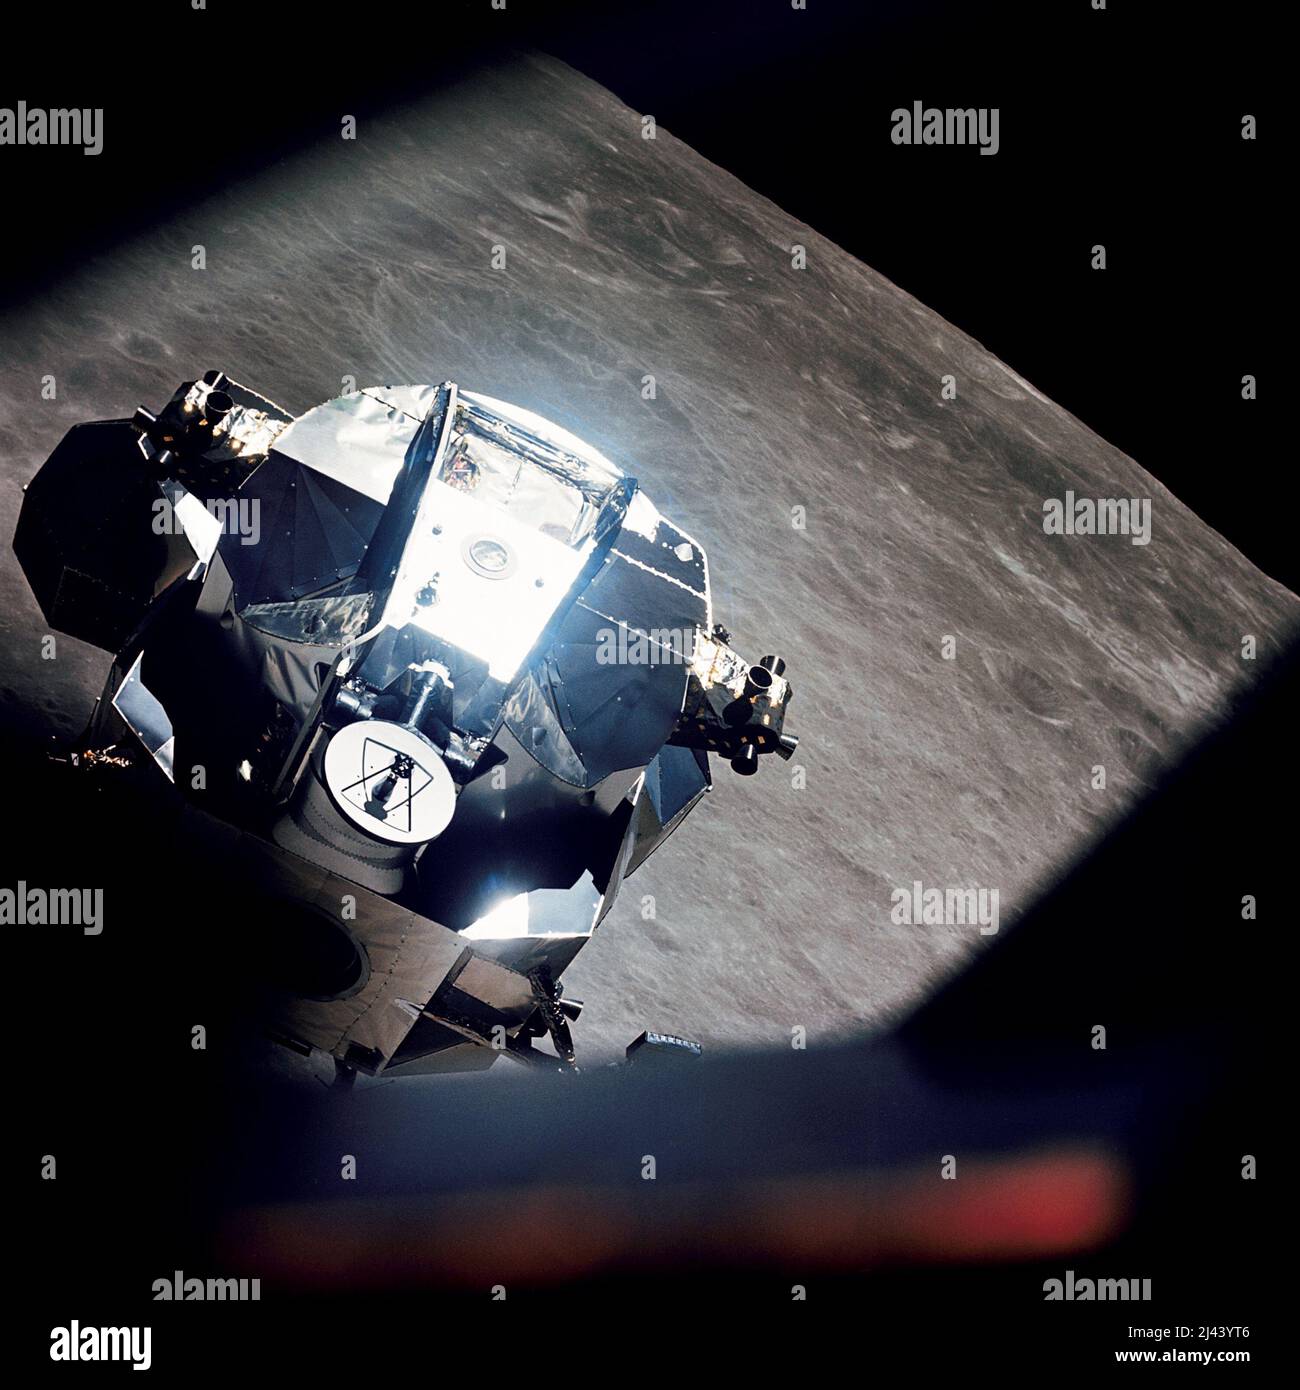 The Lunar Module Snoopy from Apollo 10 returning to the Command Module after descending to within 10 miles of the surface of the moon. The next mission,Apollo 11, was the first to land on the surface of the moon. Stock Photo